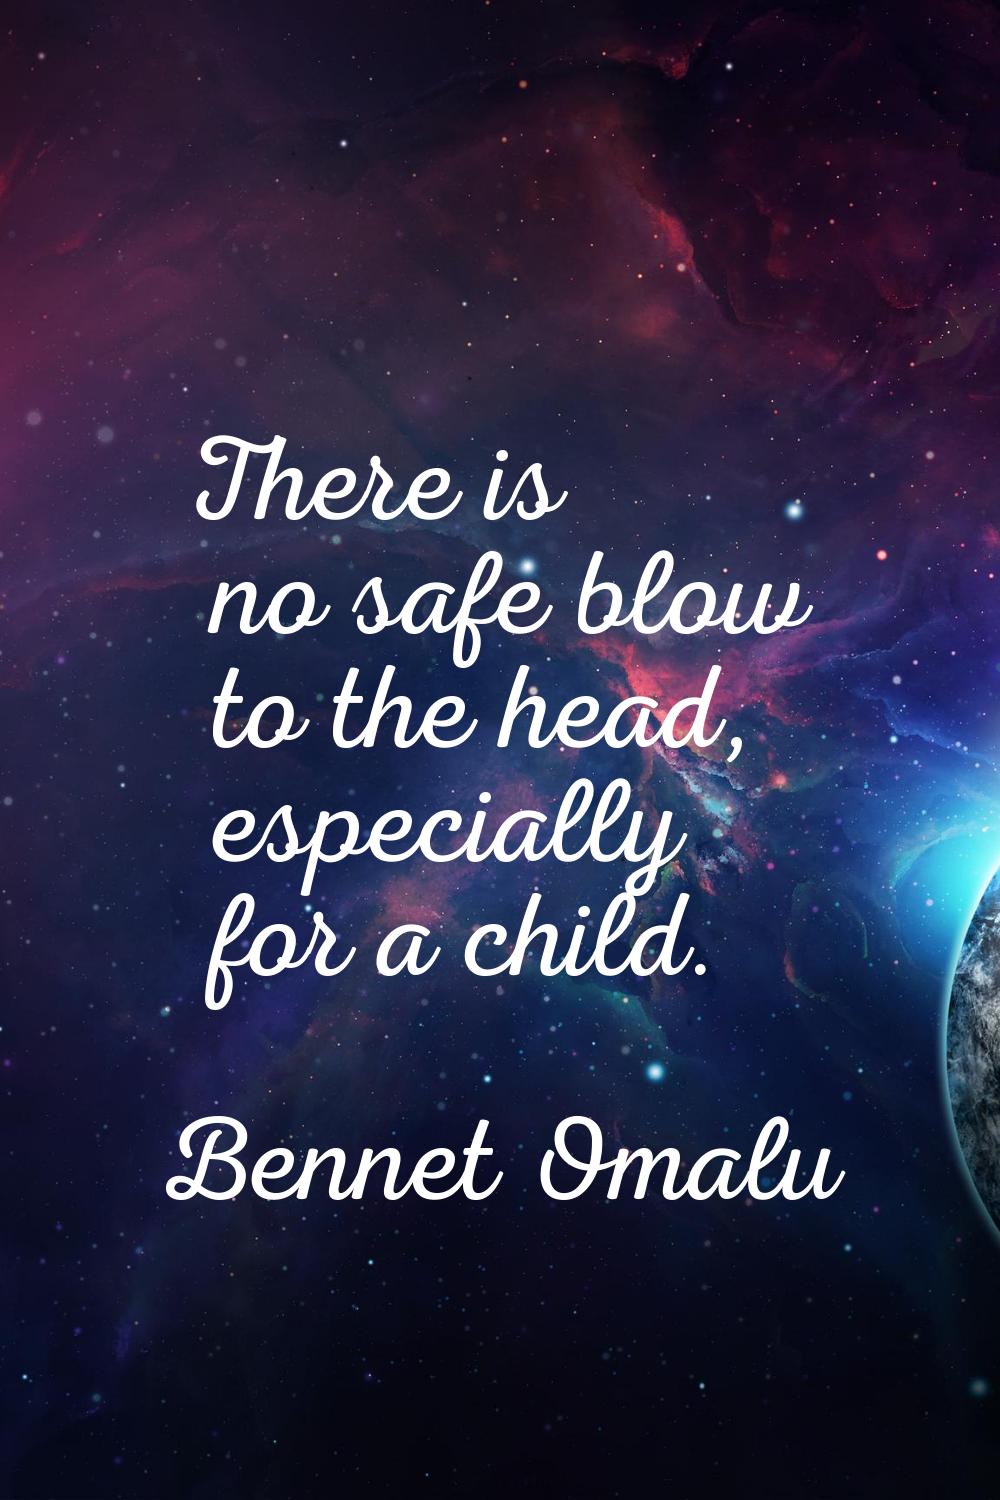 There is no safe blow to the head, especially for a child.